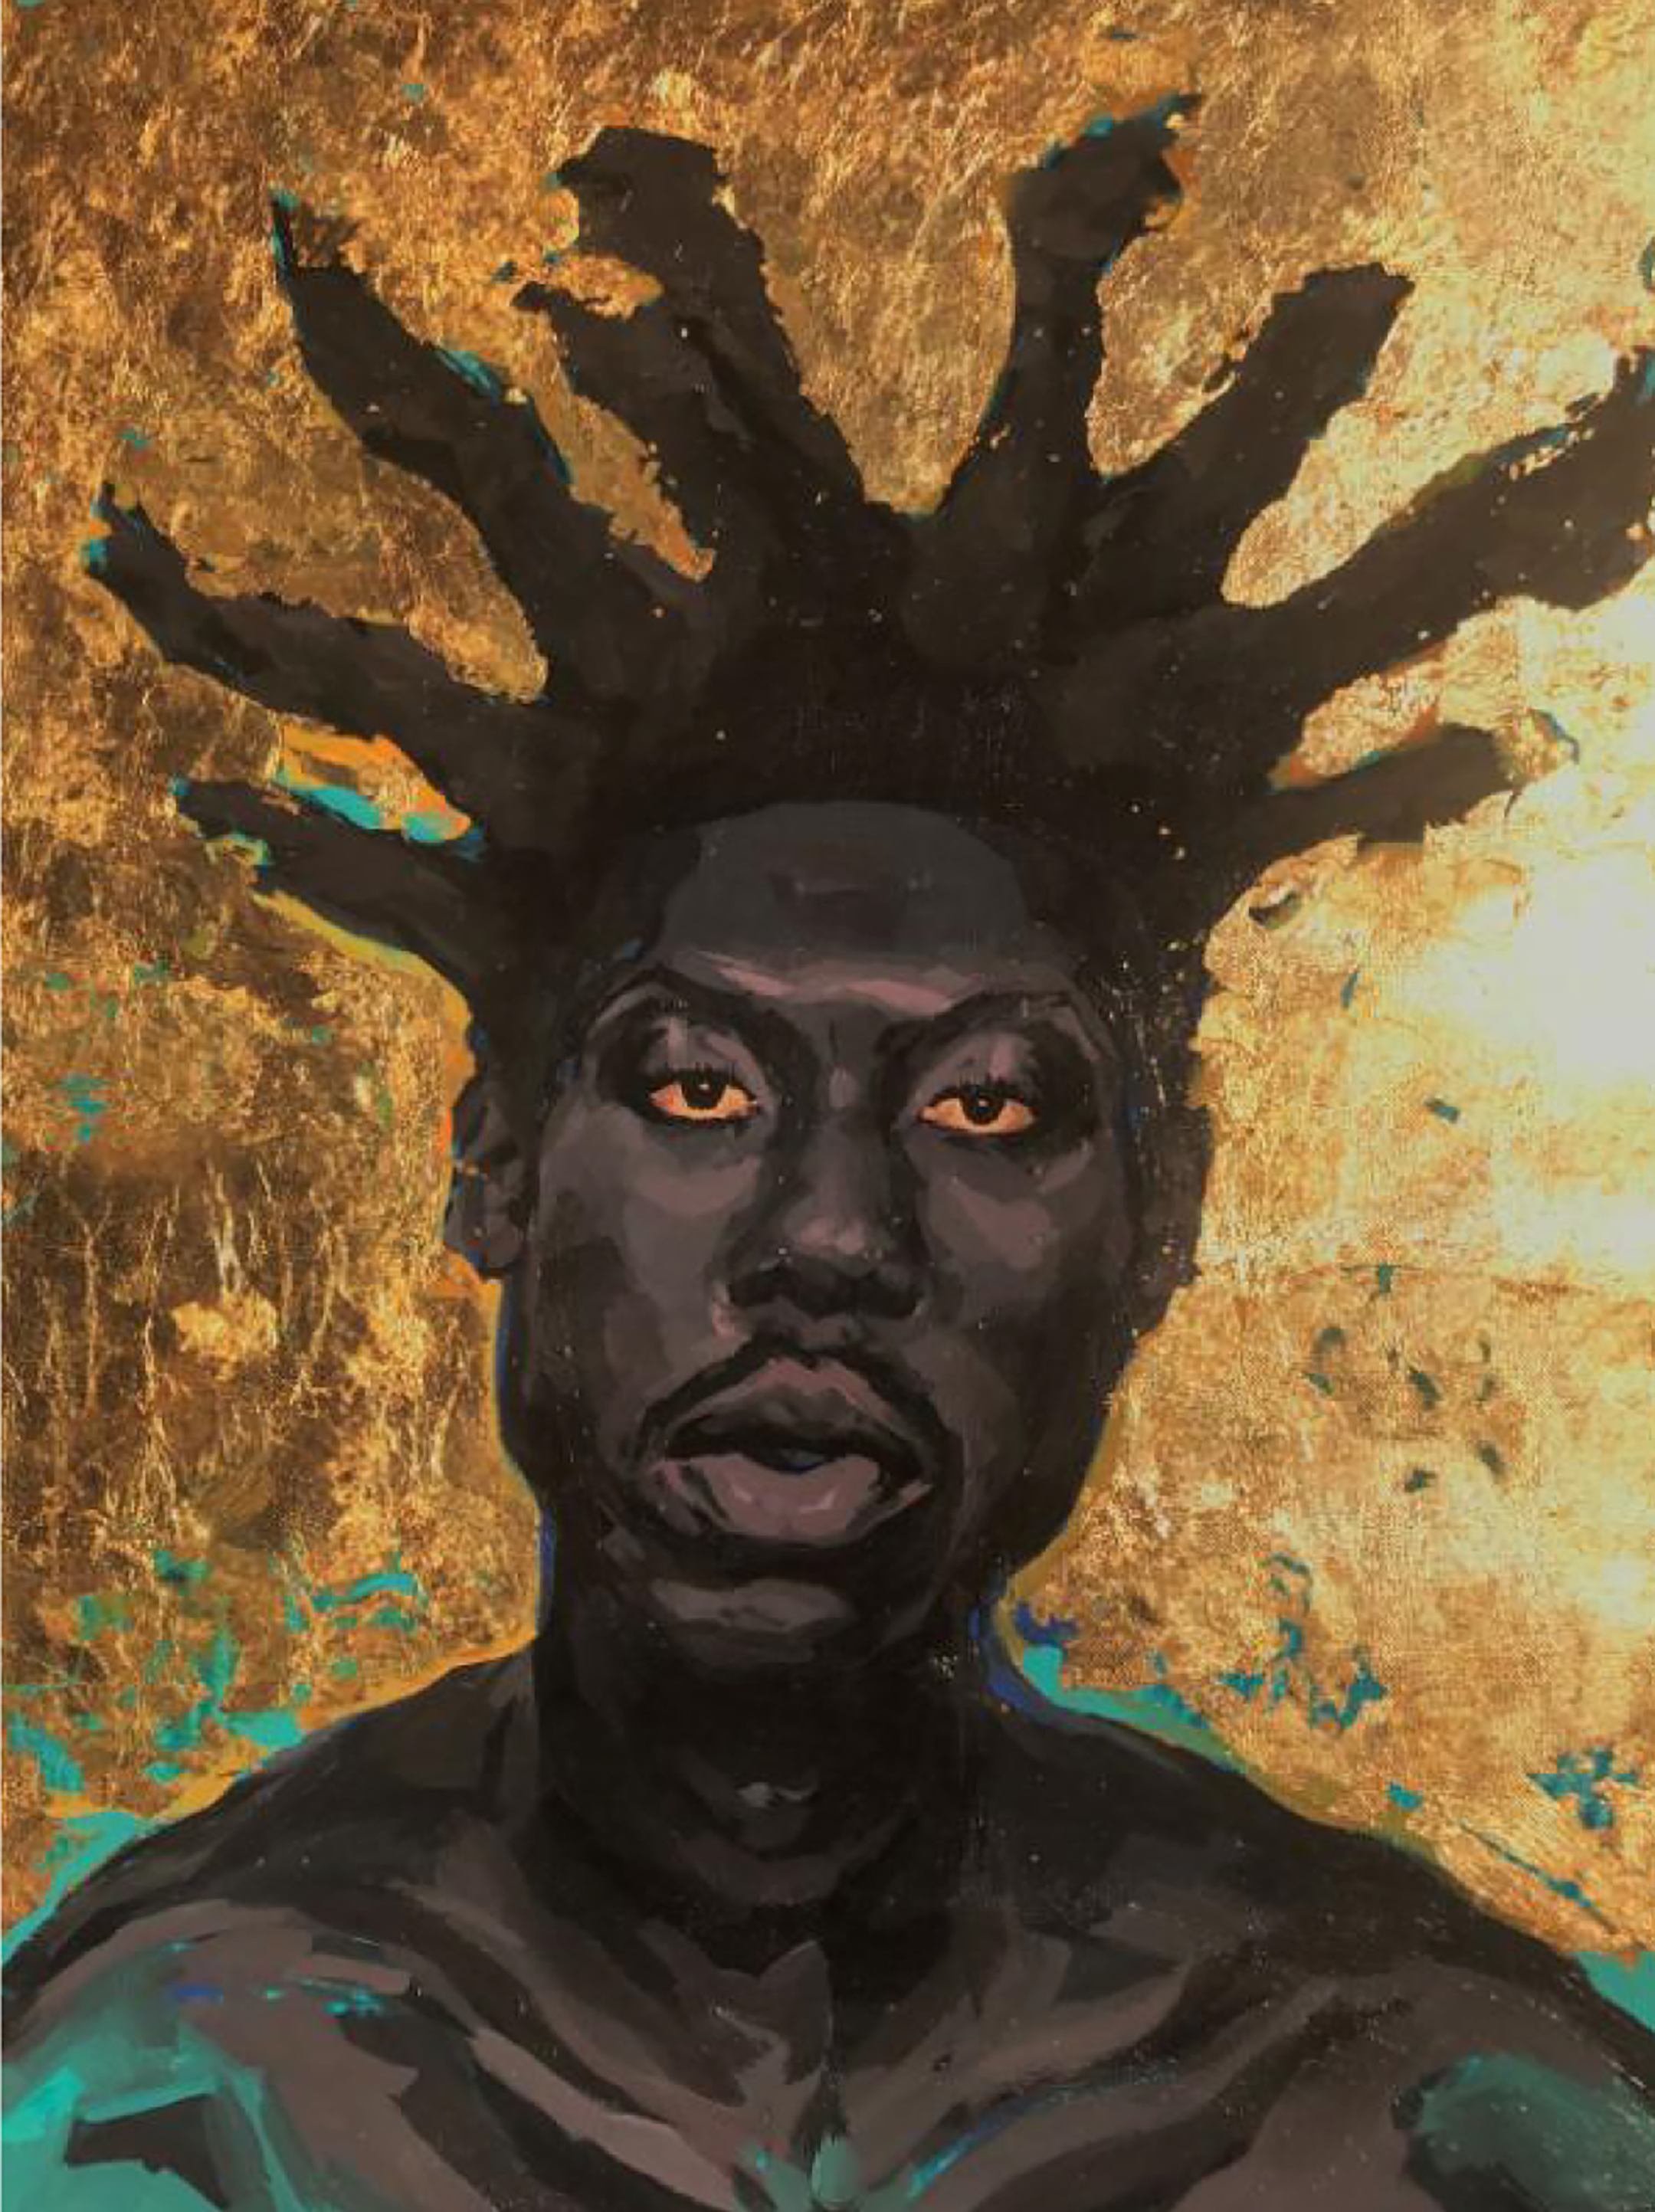 Illustration of a black man with hair sculpted into 8 points, like a crown, against a gold background